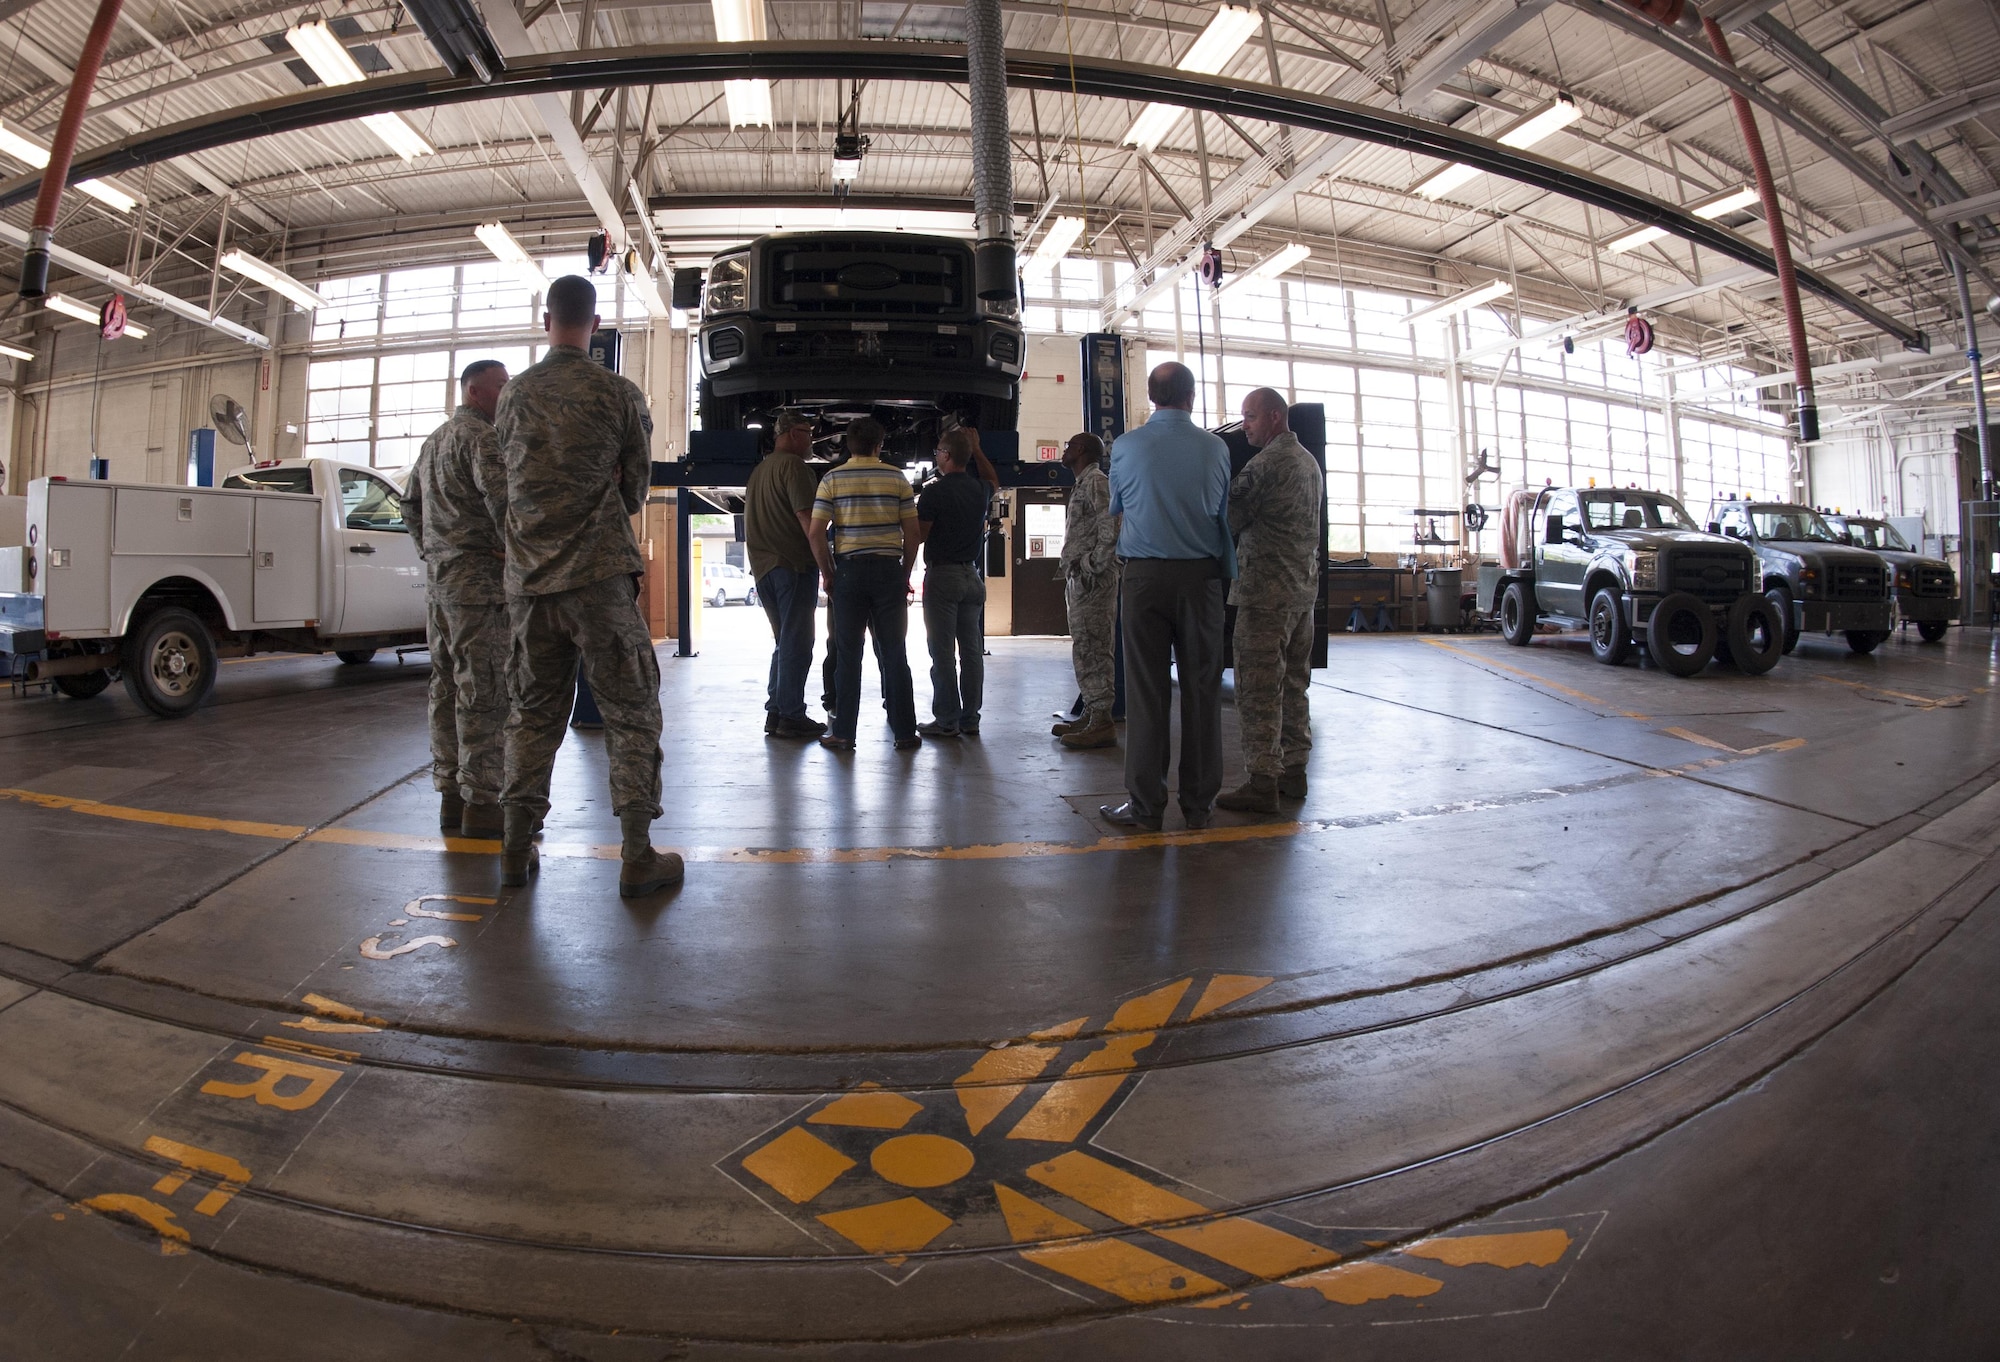 Robins Air Force Base engineers examine the bobtail while representatives from Dyess AFB and Arrow Ford gather to talk about modifications for the flightline tow tractor, also known as a bobtail vehicle, at Dyess AFB, Texas, June 14, 2017. If the modification is approved, the new I-beam will fit 1999 to present F-350 chassis; additionally, there is no modification needed for the vehicles except for the replacement twin I-beams which meet or exceed Original Equipment Manufacturer standards. (U.S. Air Force photo by Airman 1st Class April Lancto)